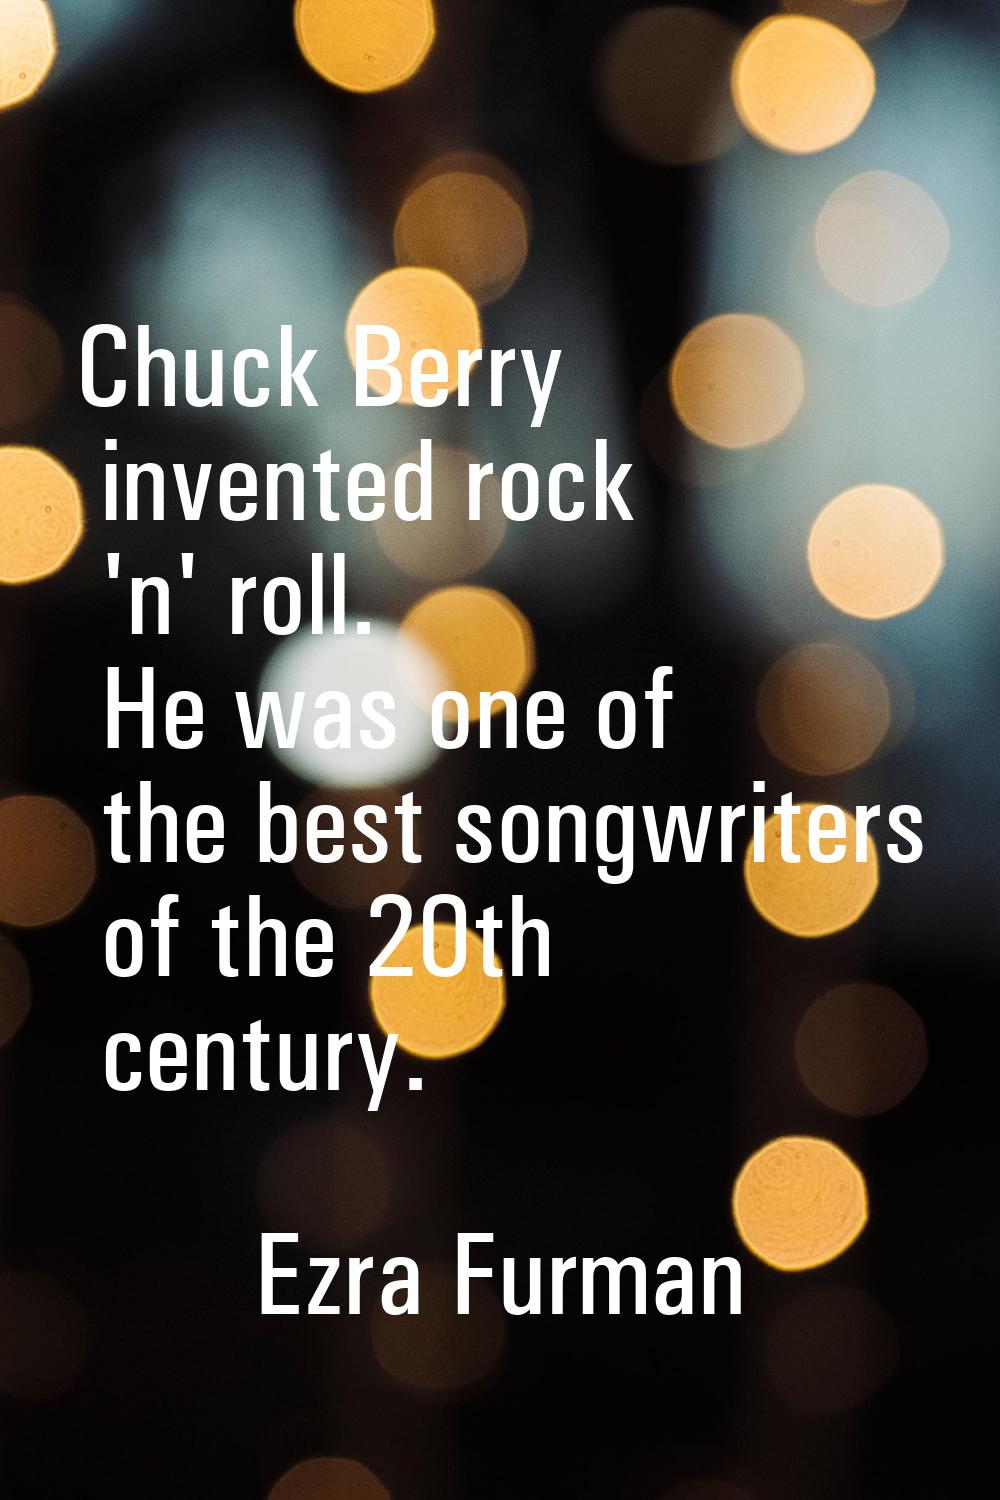 Chuck Berry invented rock 'n' roll. He was one of the best songwriters of the 20th century.